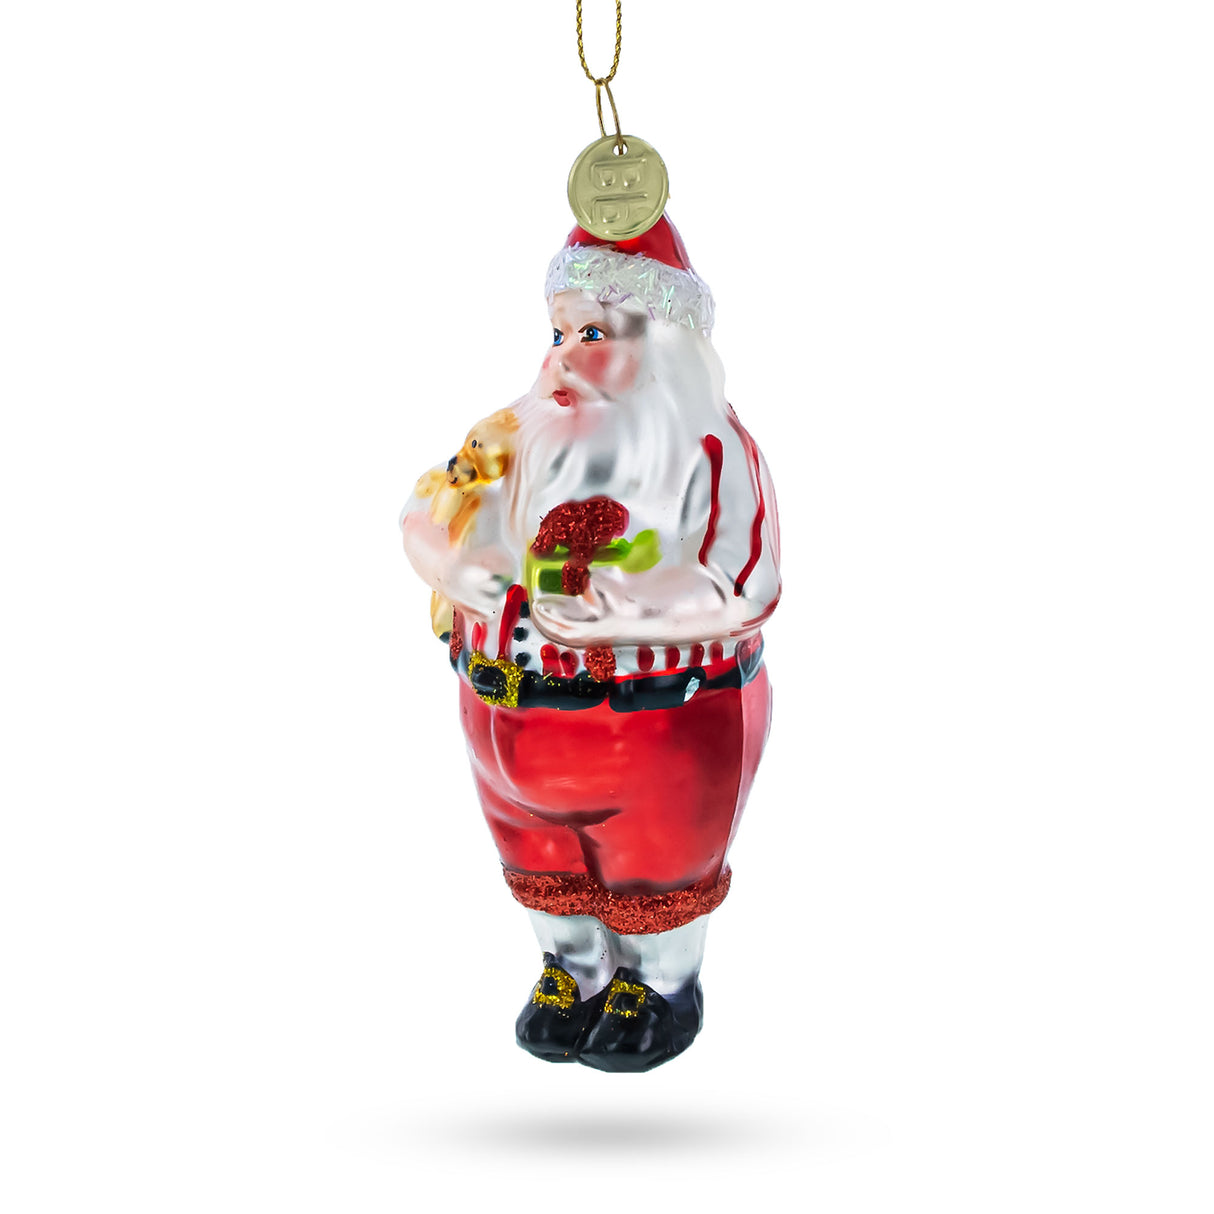 Santa's Cuddle Time: Santa Holding a Teddy Bear - Blown Glass Christmas Ornament in Red color,  shape